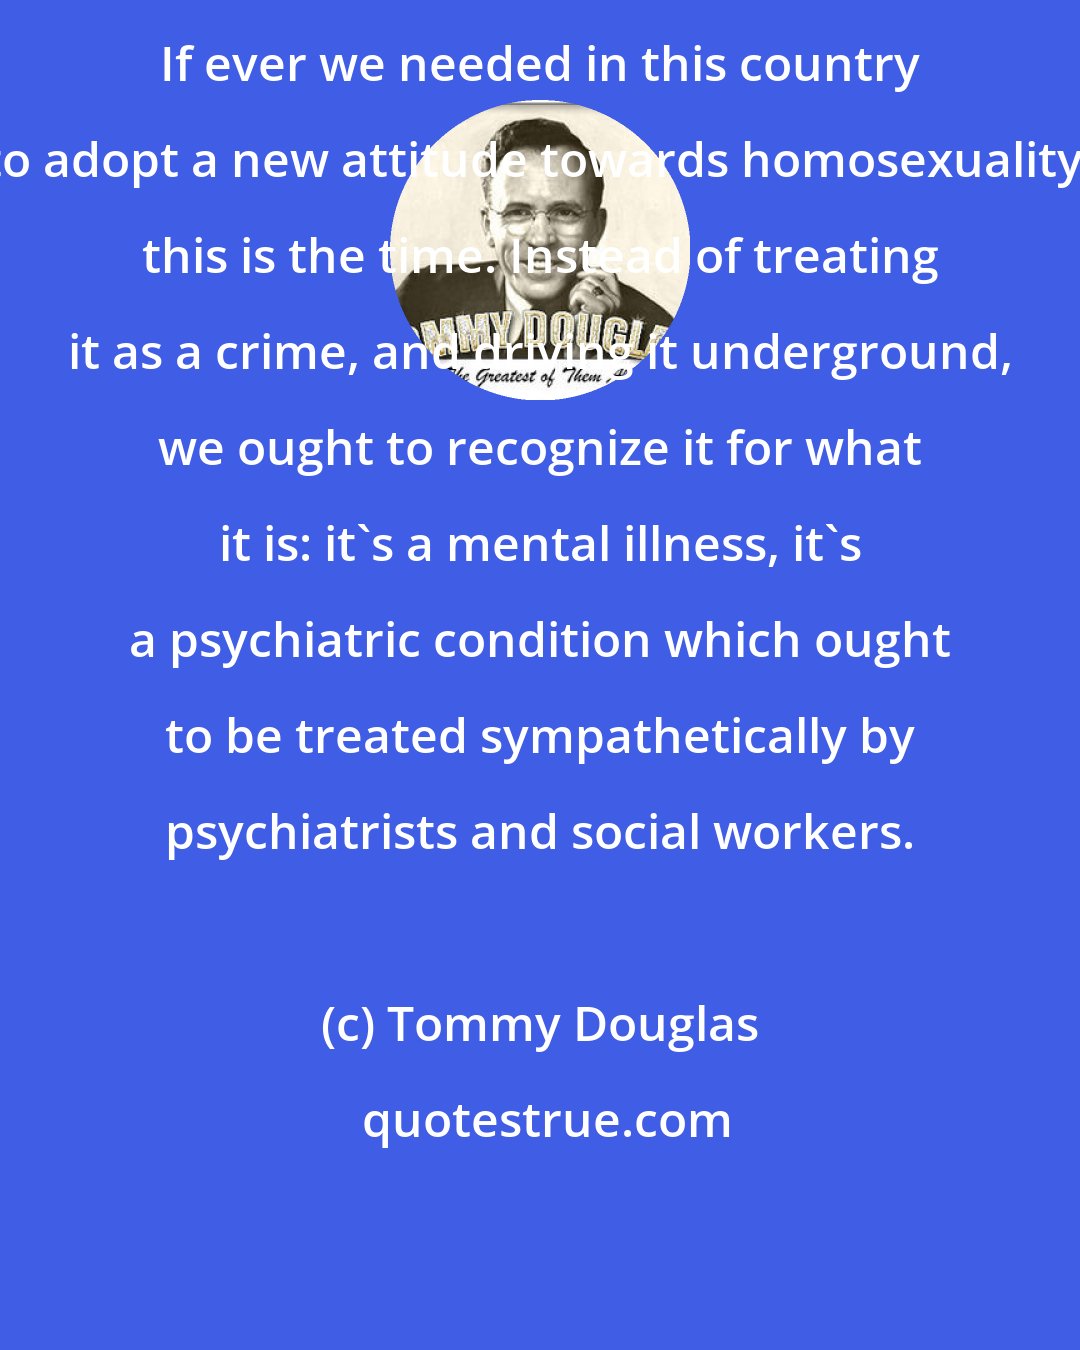 Tommy Douglas: If ever we needed in this country to adopt a new attitude towards homosexuality, this is the time. Instead of treating it as a crime, and driving it underground, we ought to recognize it for what it is: it's a mental illness, it's a psychiatric condition which ought to be treated sympathetically by psychiatrists and social workers.